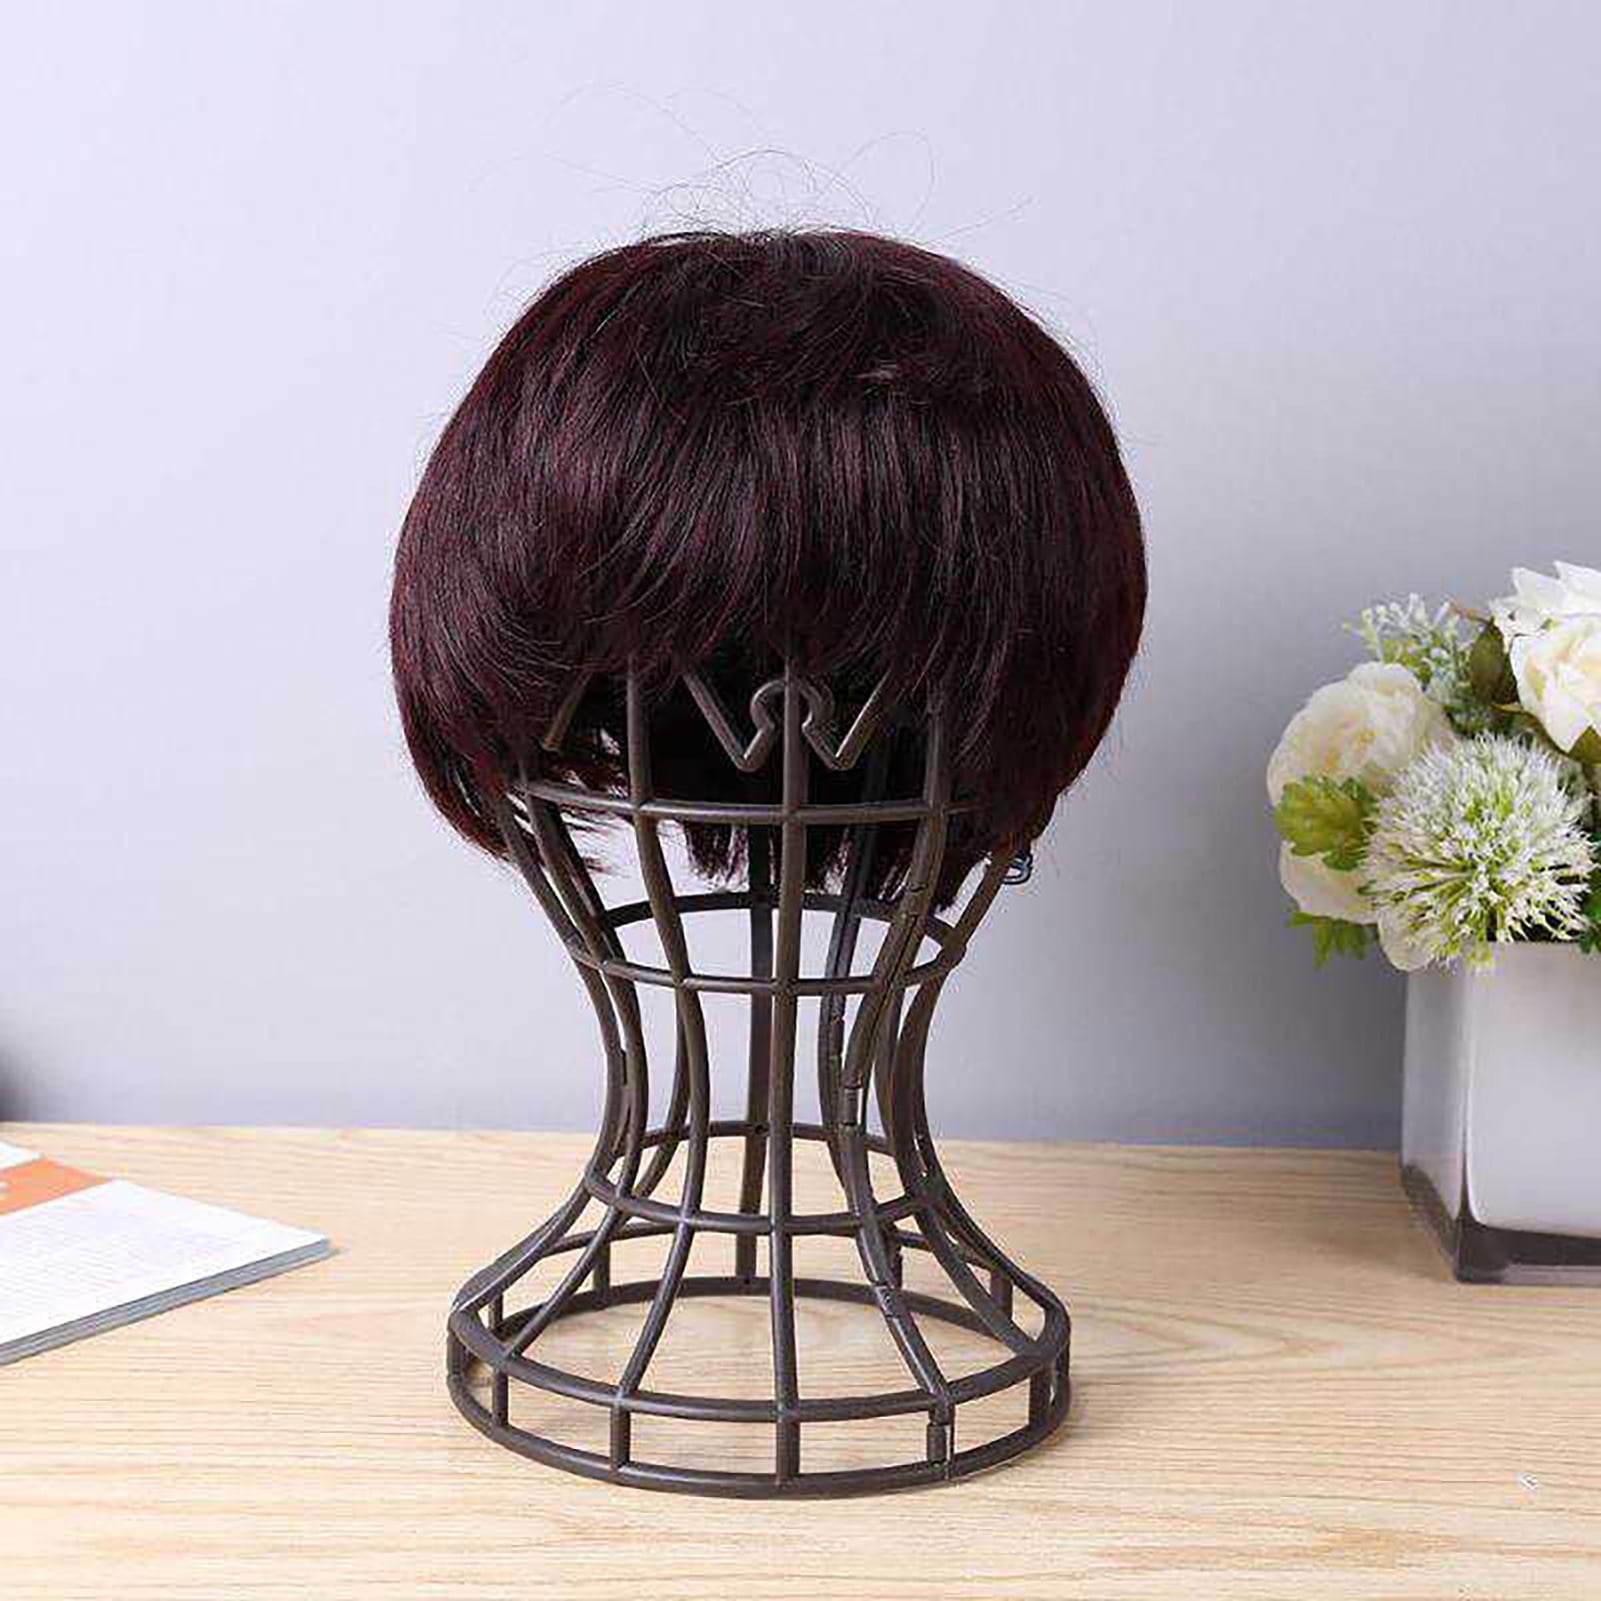 Travelwant 2Pcs/Set Wig Stand Holder, Premium Portable Collapsible Wig Holder for Multiple Wigs, Durable Wig Stands for Women, Size: One size, Black